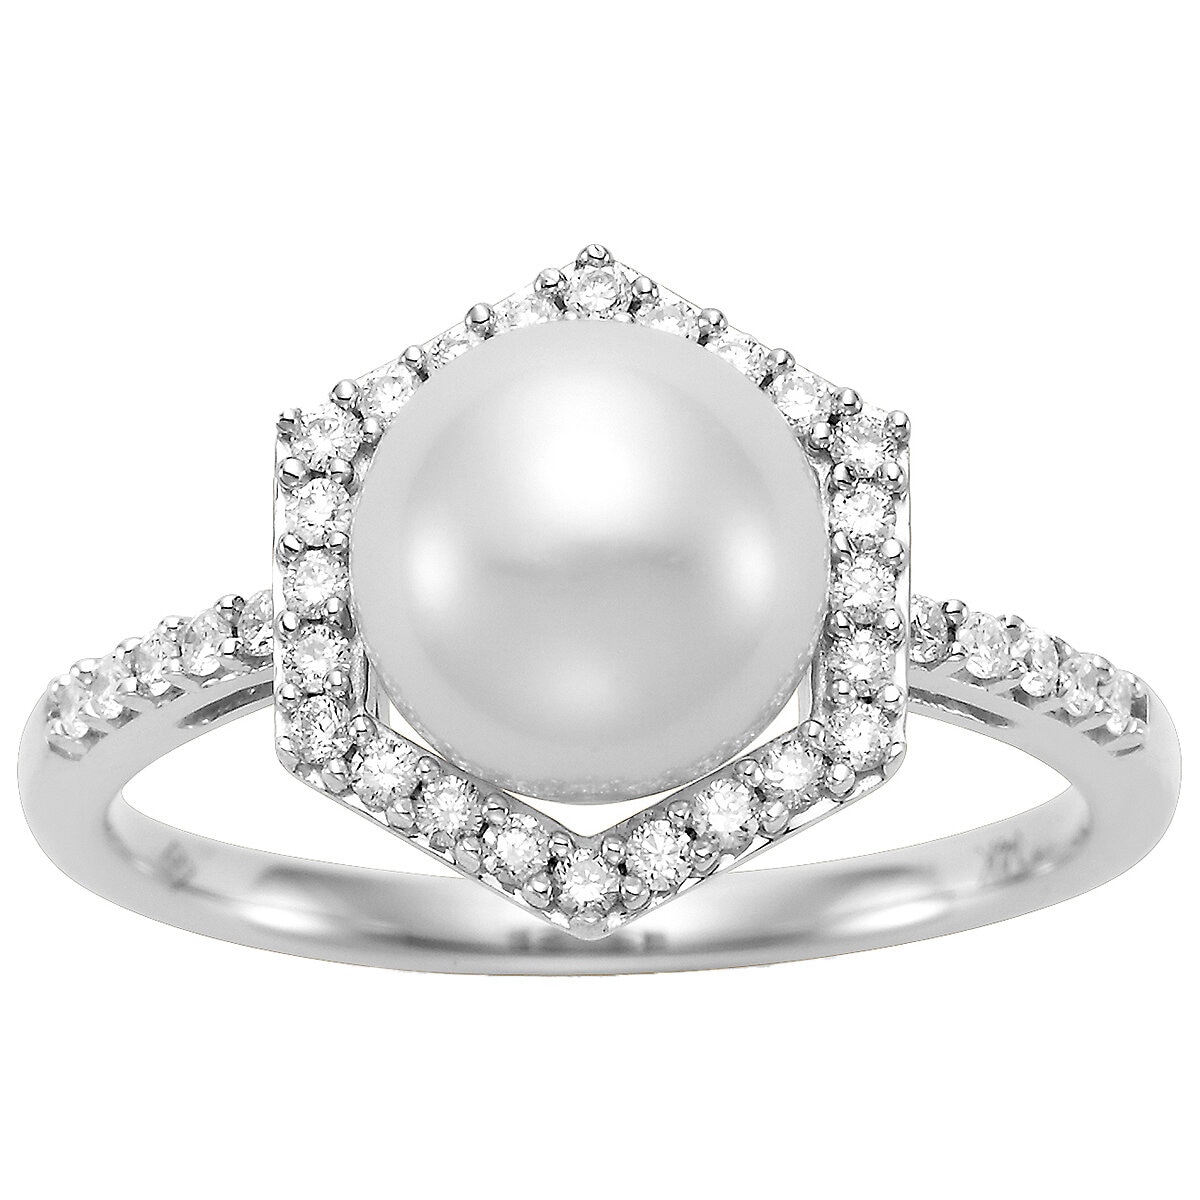 18KT White Gold 0.25CTW DIA 8.0-8.5MM Freshwater Cultured Pearl Ring